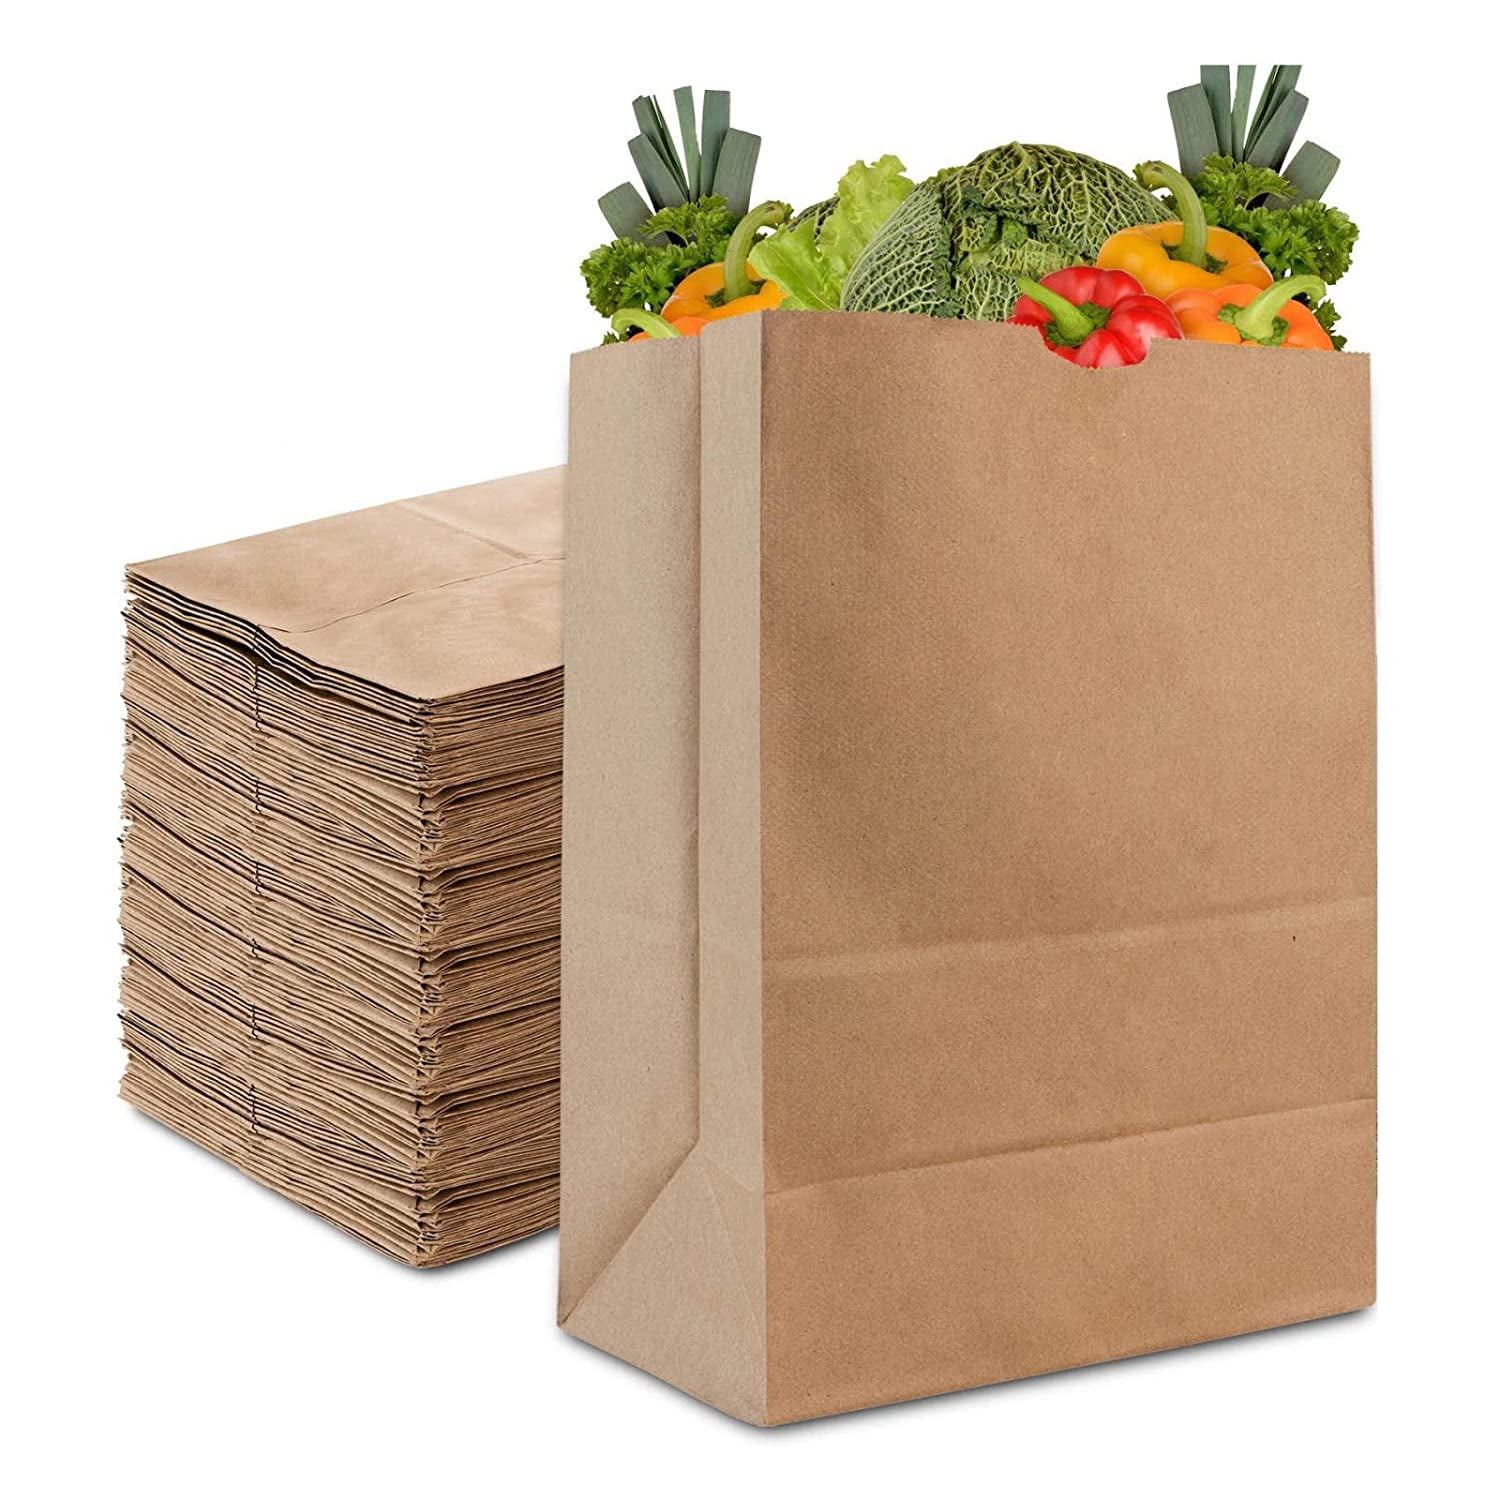 50 Paper Retail Grocery Bags Kraft with Handles 12x7x17 by Duro 